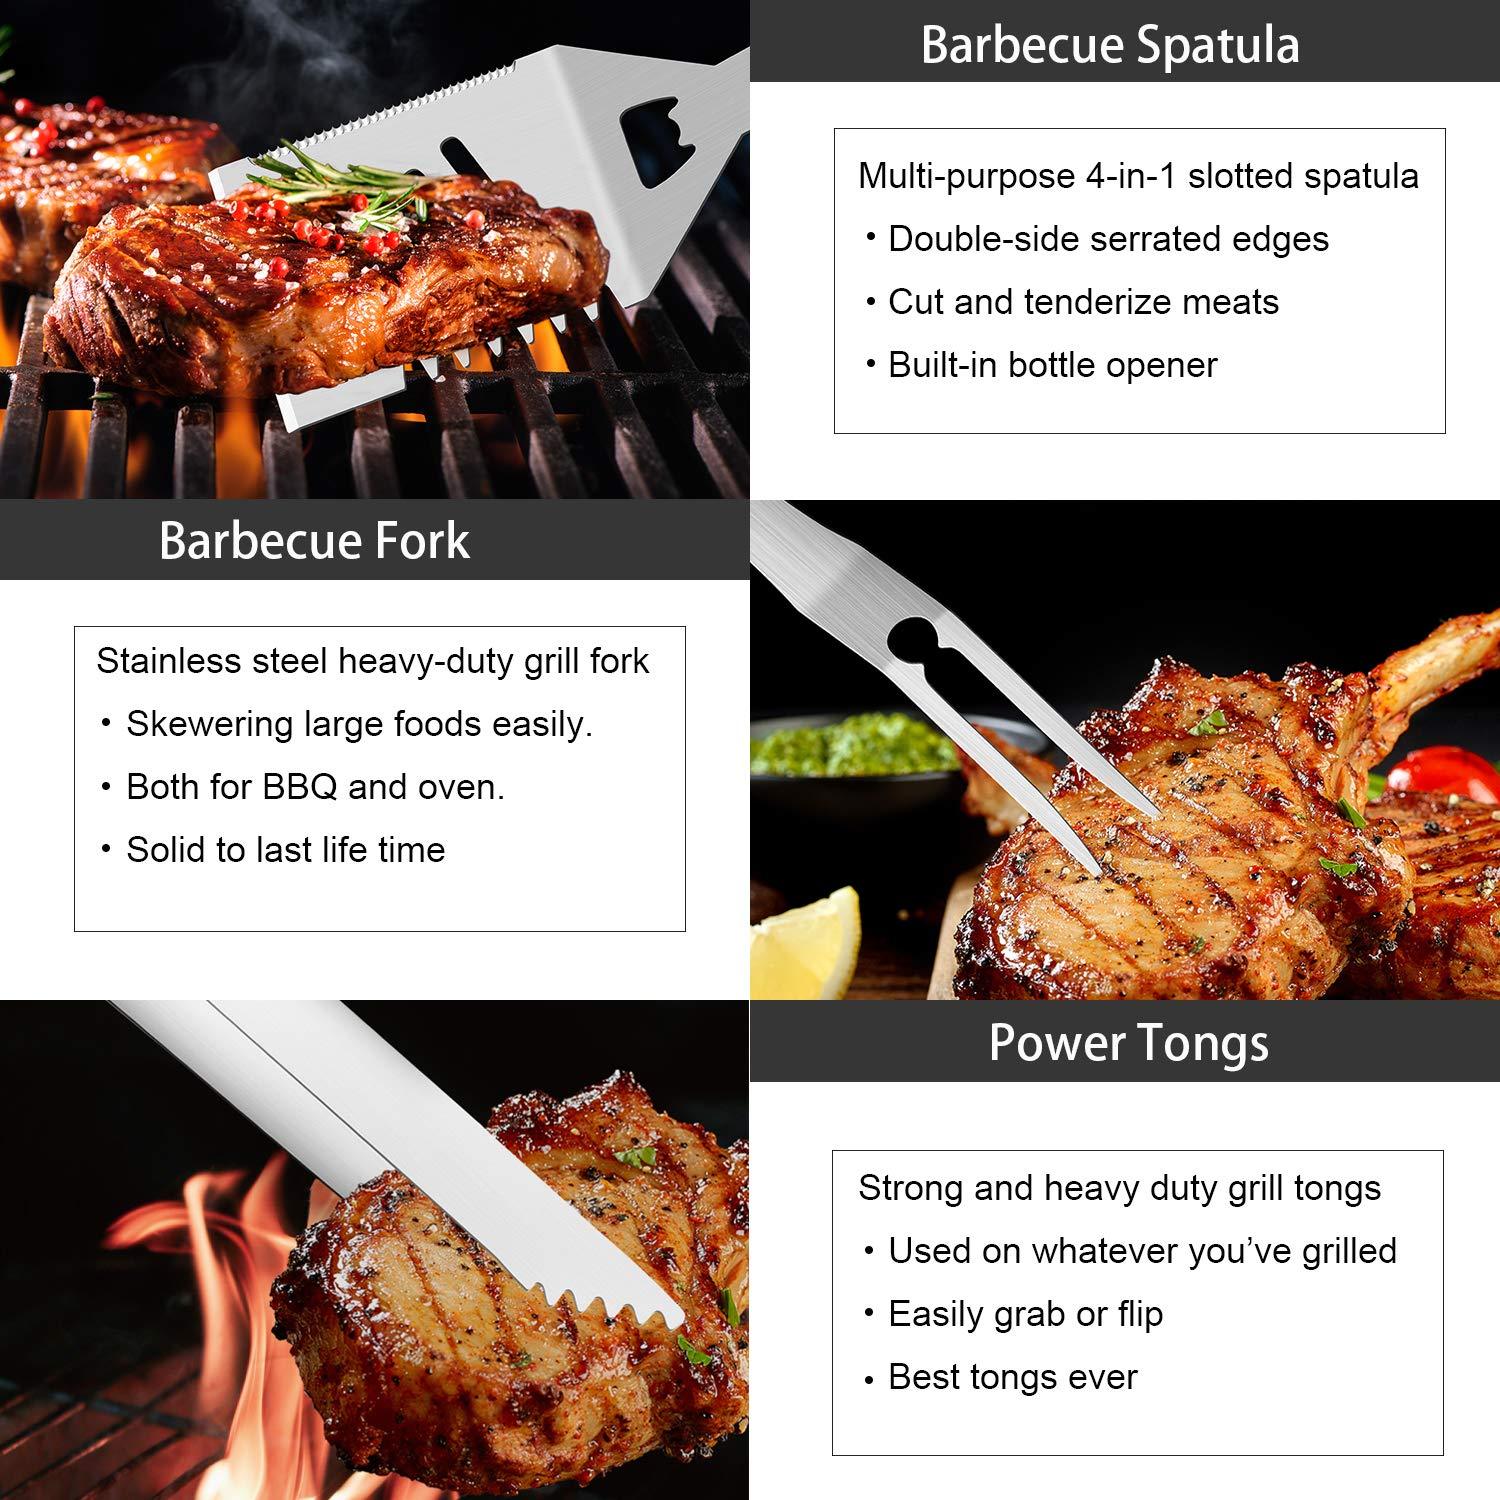 ROMANTICIST 30pcs BBQ Grill Tool Set for Men Dad, Heavy Duty Stainless Steel Grill Utensils Set, Non-Slip Grilling Accessories Kit with Thermometer, Mats in Aluminum Case for Travel, Outdoor Black - CookCave